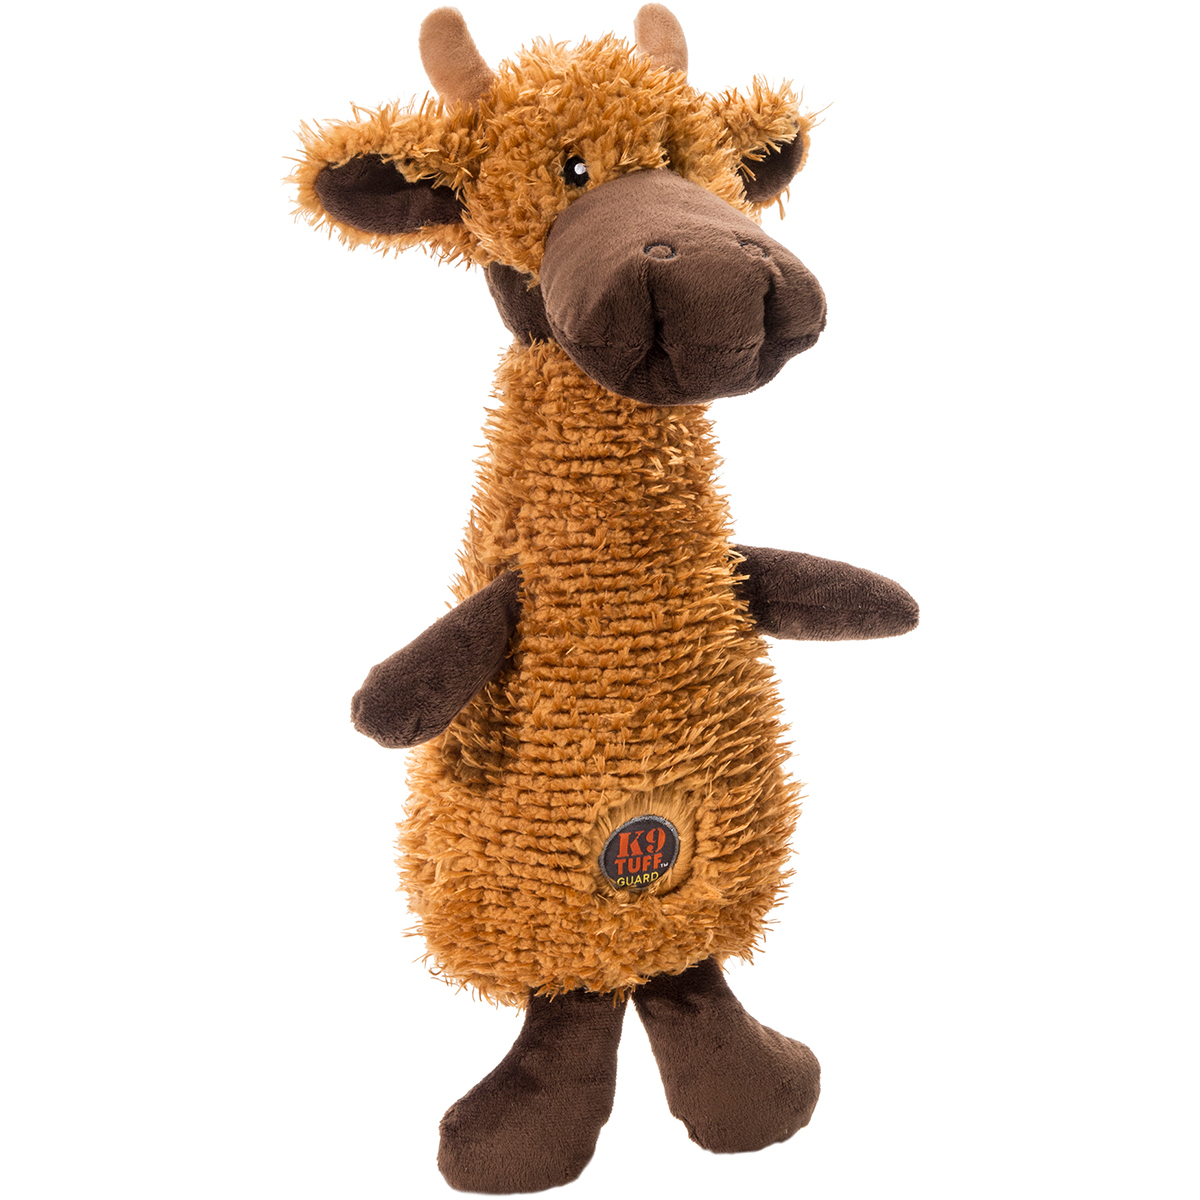 Picture of Charming Pet 61380S Moose - Scruffles Pet Toy, Small - 3.5 x 5.5 x 11 in.